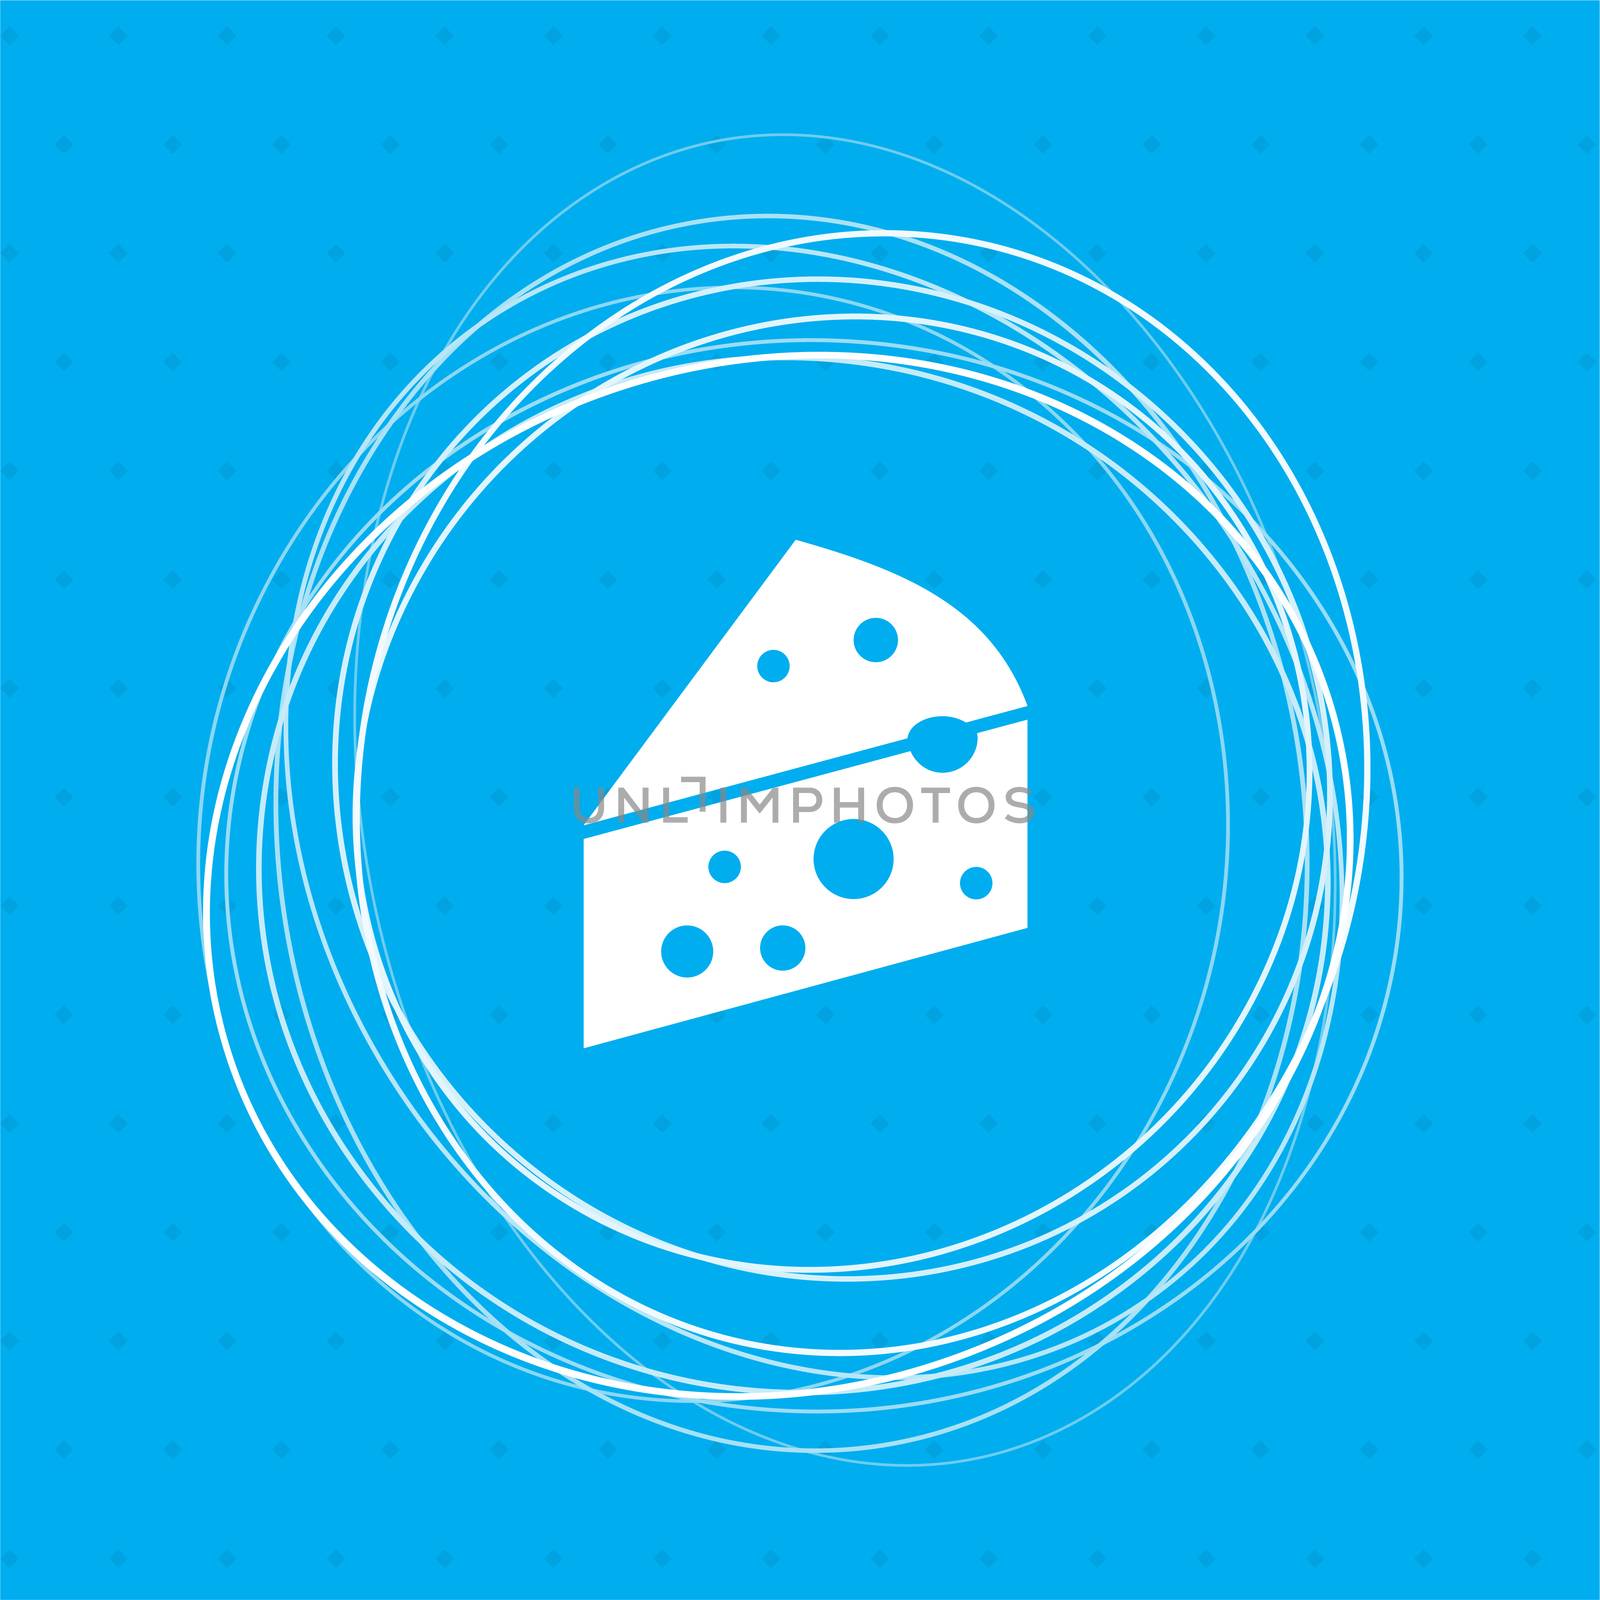 Cheese icon on a blue background with abstract circles around and place for your text. illustration